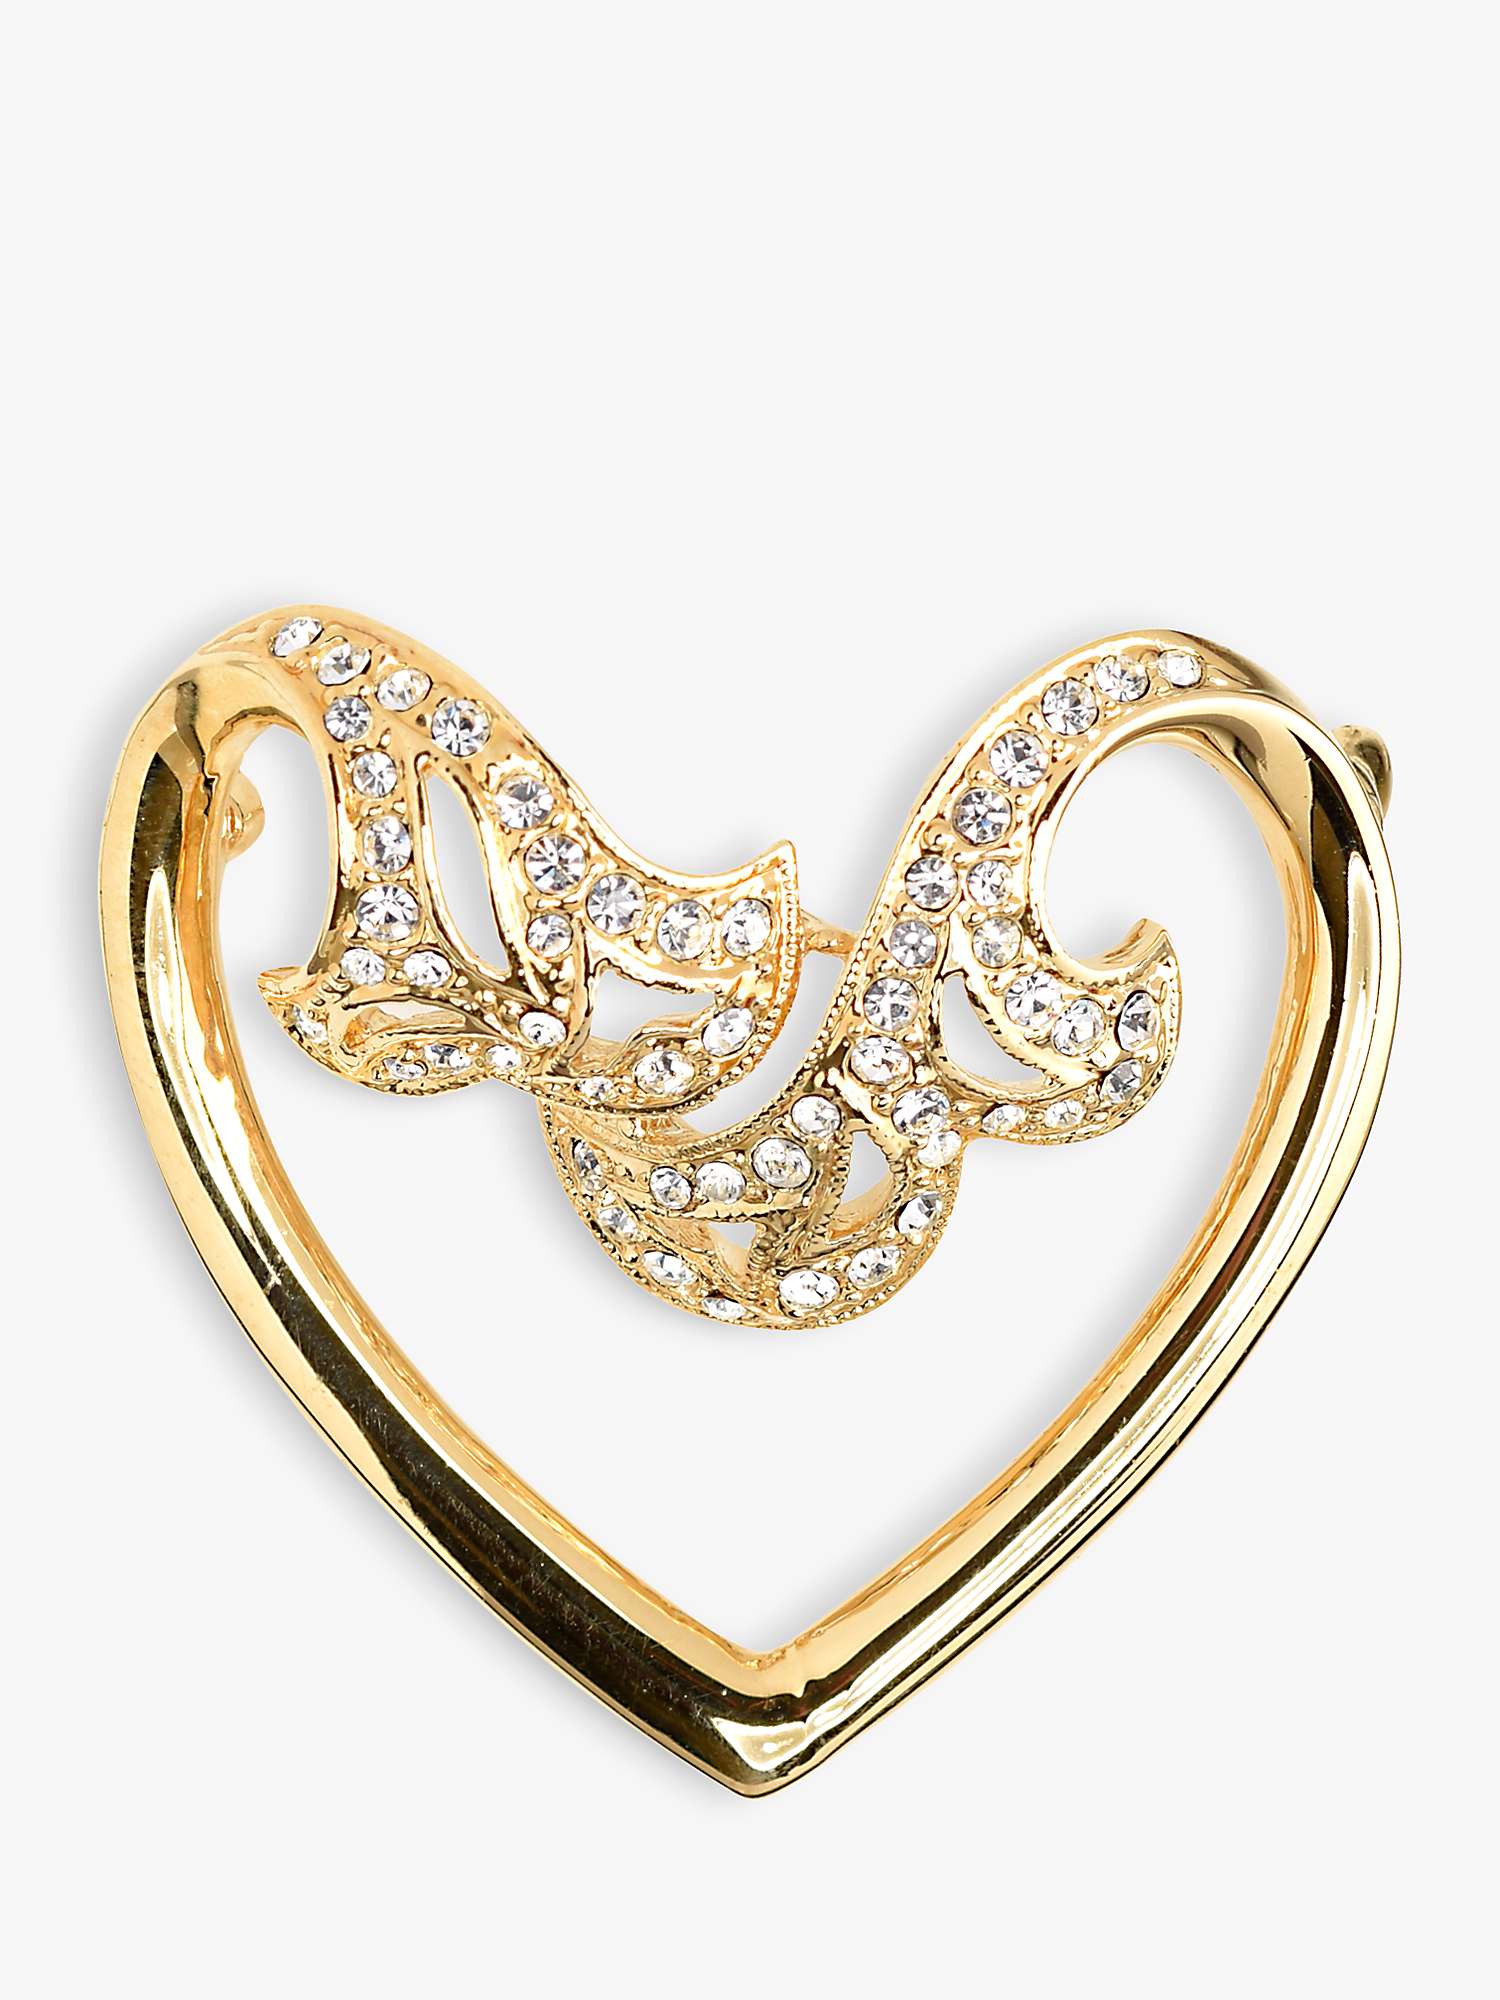 Buy Eclectica Vintage Attwood & Sawyer Swarovski Crystal Heart Brooch, Dated Circa 1990s, Gold Online at johnlewis.com